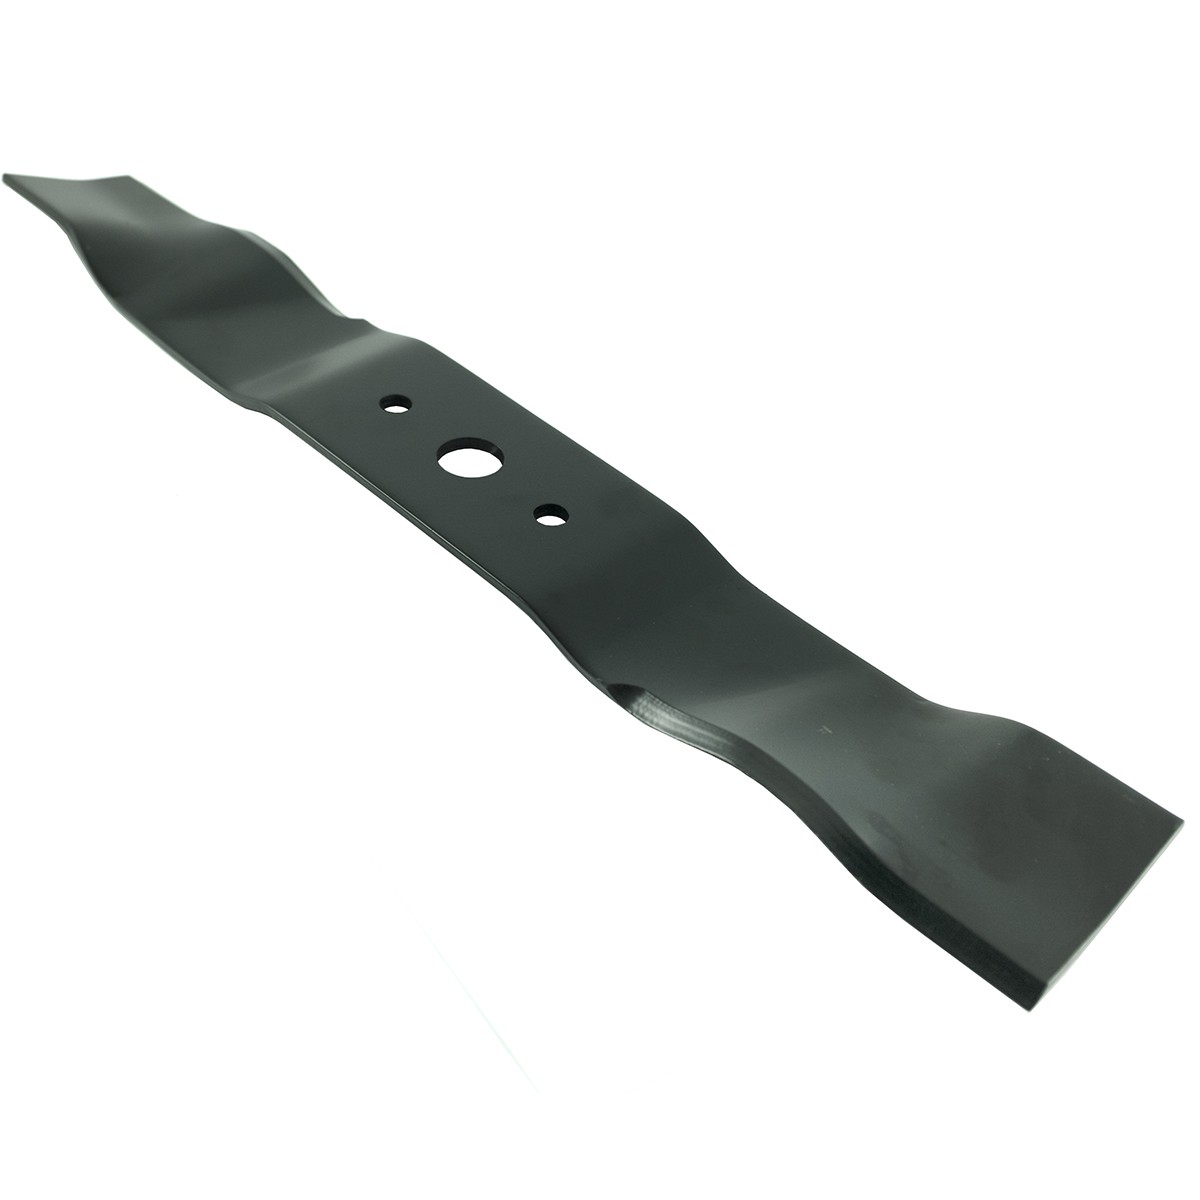 Mulching knife 415 mm, RIGHT rotating for STIGA Estate Master HST lawn tractor, 82004360/0